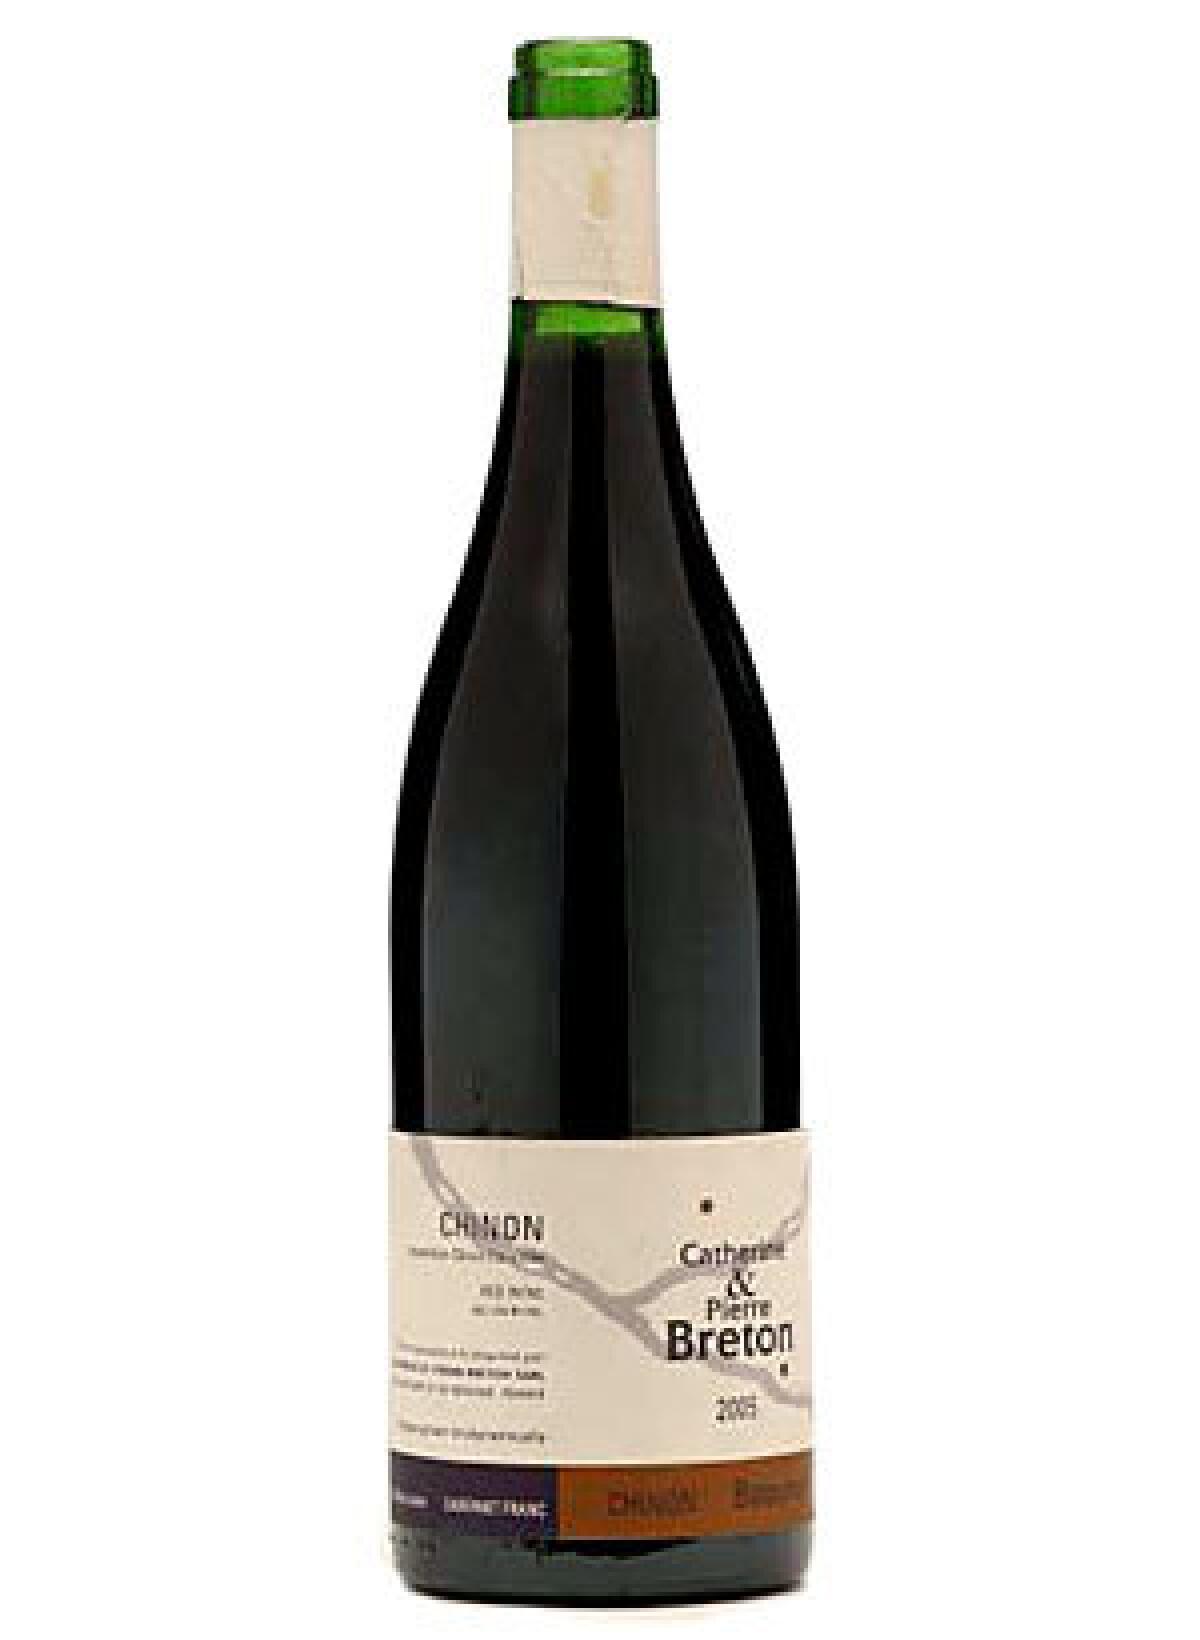 WINE OF THE WEEK: 2005 Catherine and Pierre Breton Chinon 'Beaumont' Related: Prosecco shows its serious side West Coast brewers pick up the distilling spirit Wine wisdom in Los Angeles A craft beer revolution is brewing in Southern California